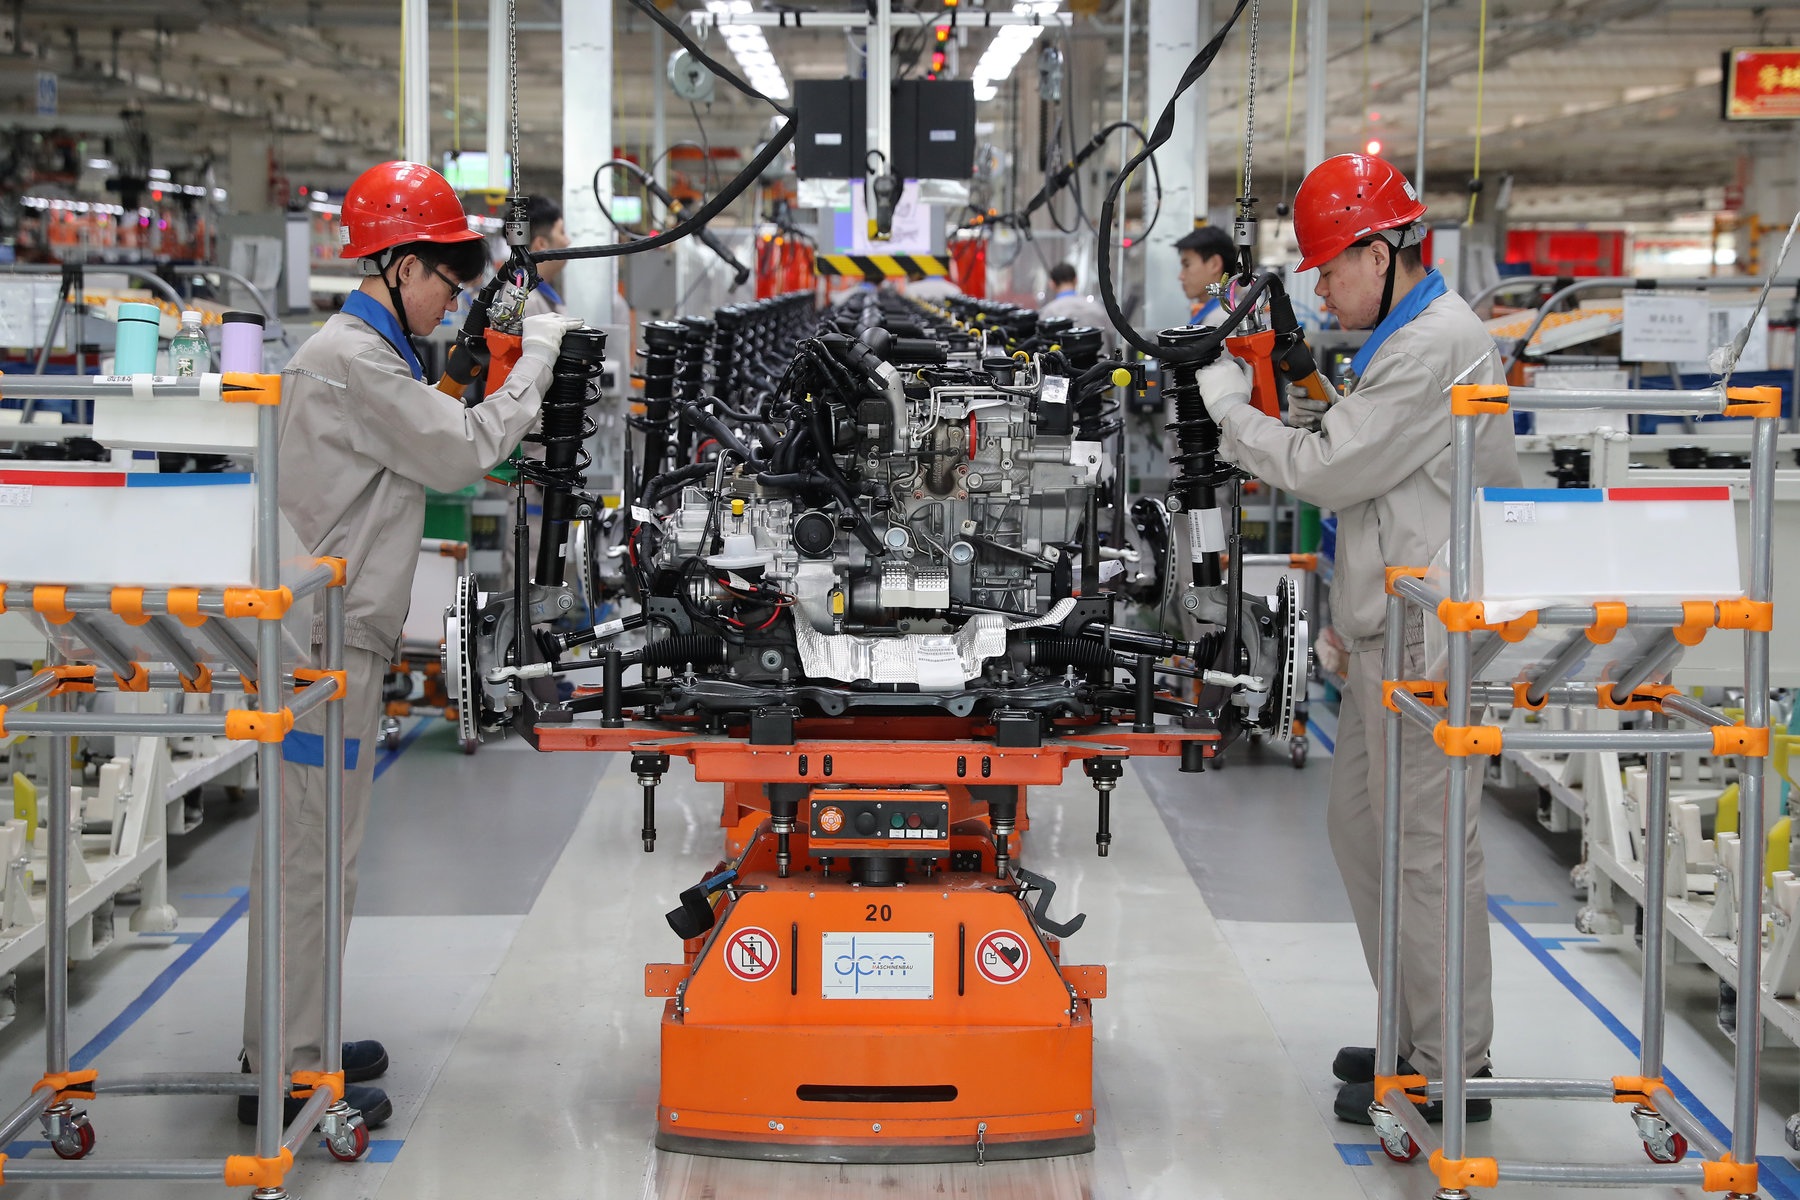 Employees work on the assembly line of Audi Q3 at a whole vehicle manufacturing base of the Sino German joint venture FAW Volkswagen Automotive Co Ltd on Dec. 5 2019 in Tianjin